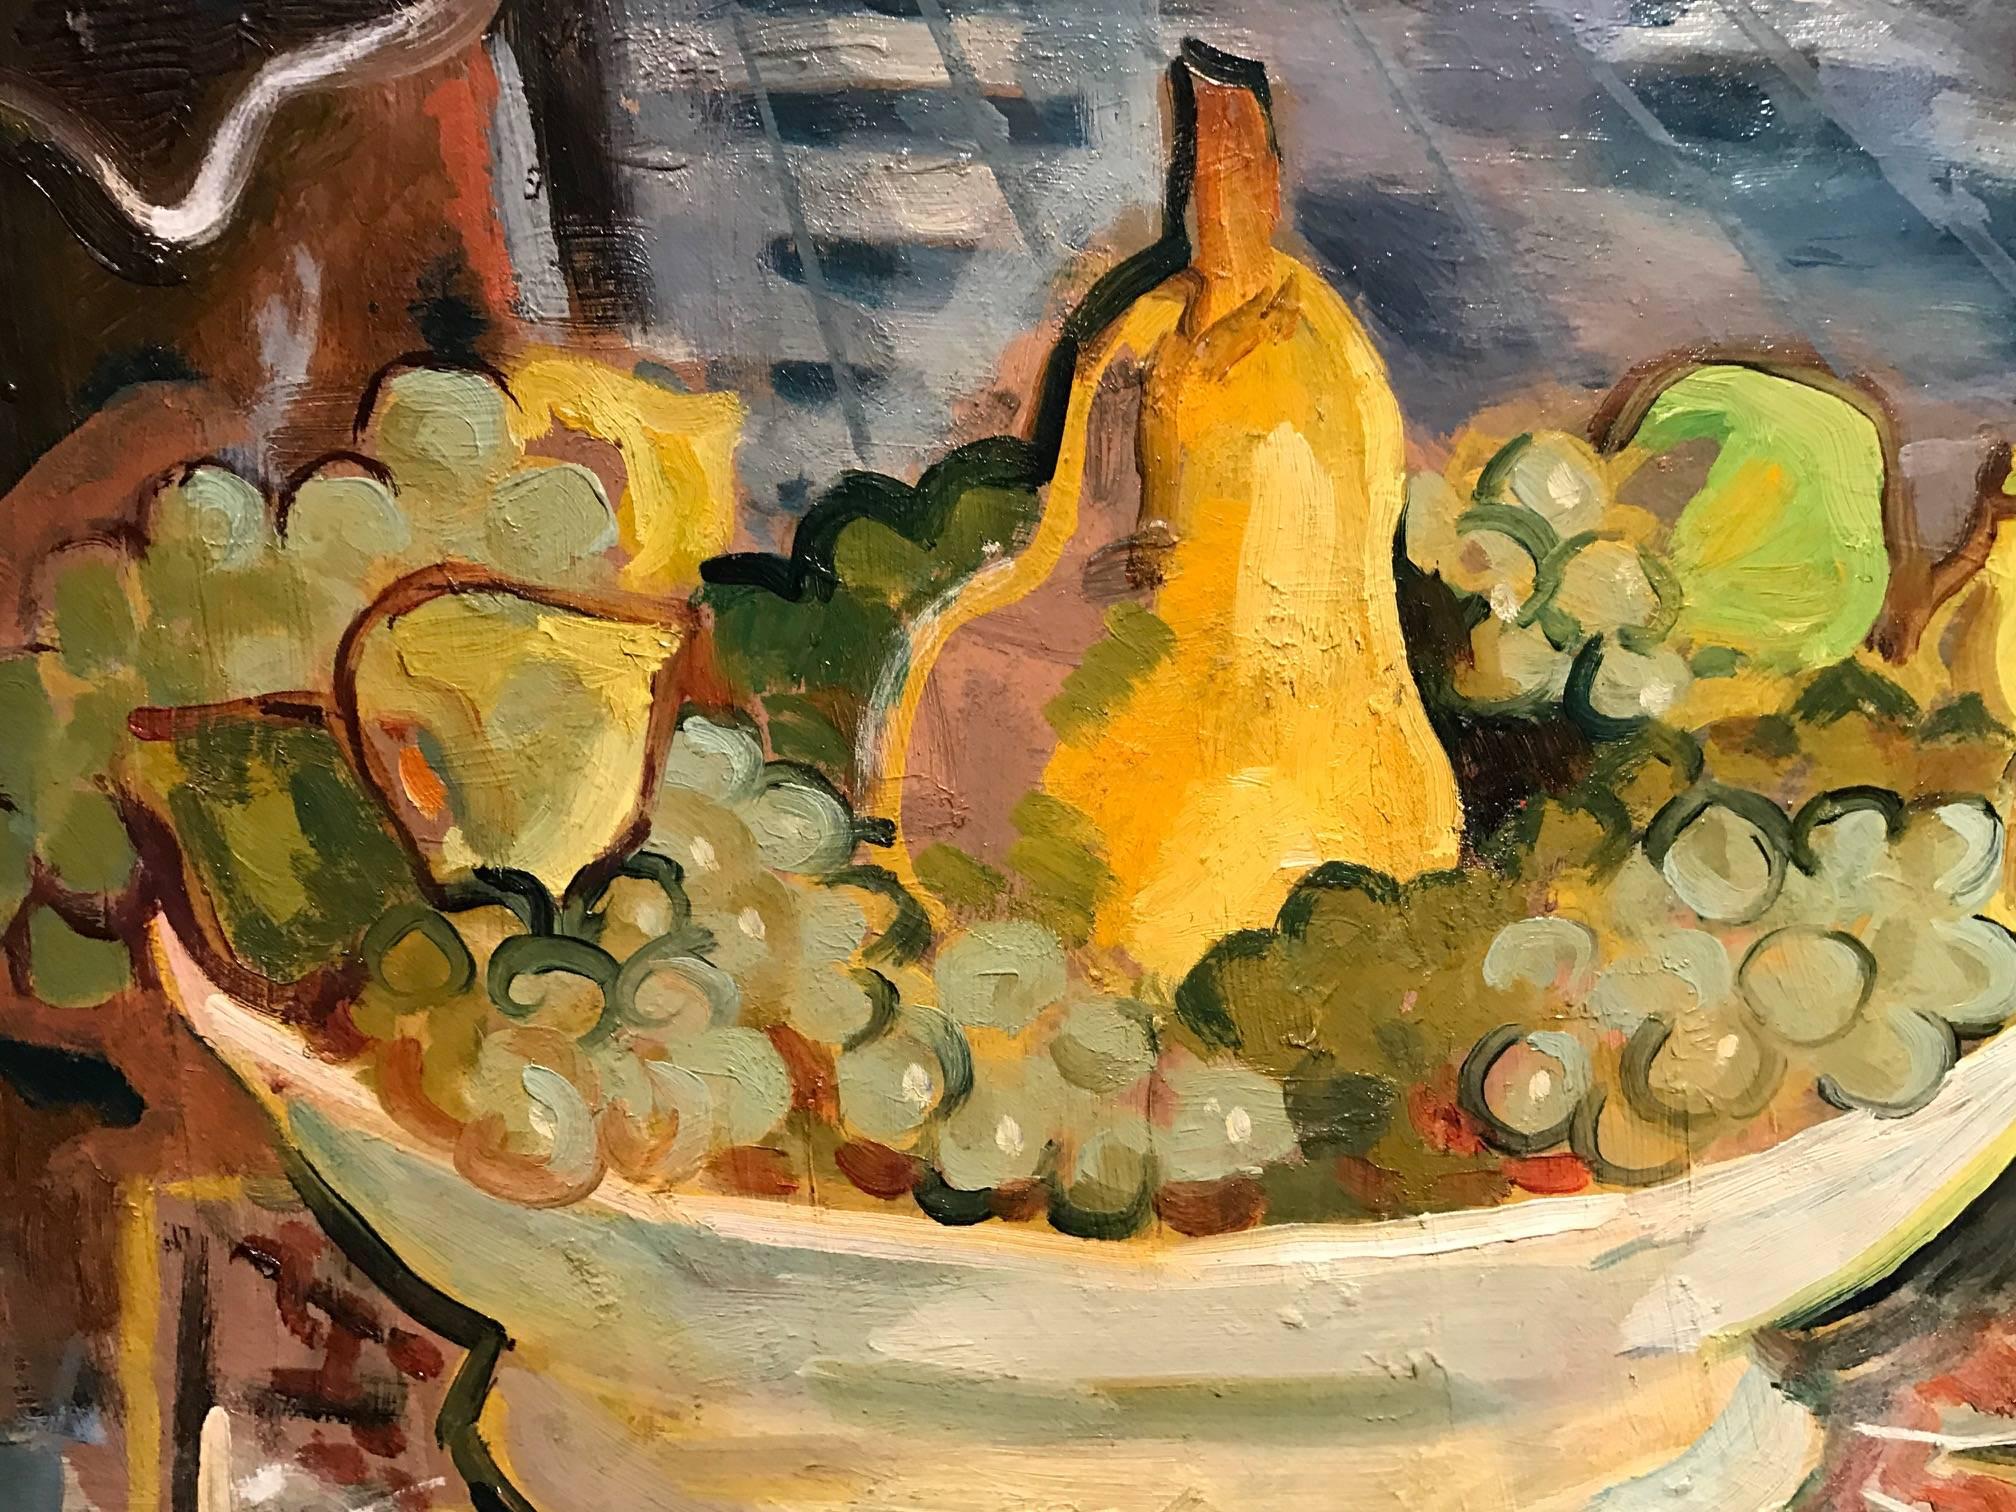 Mid 20th Century French Post-Impressionist Oil Painting Grapes & Pears - Brown Still-Life Painting by Francois Baboulet